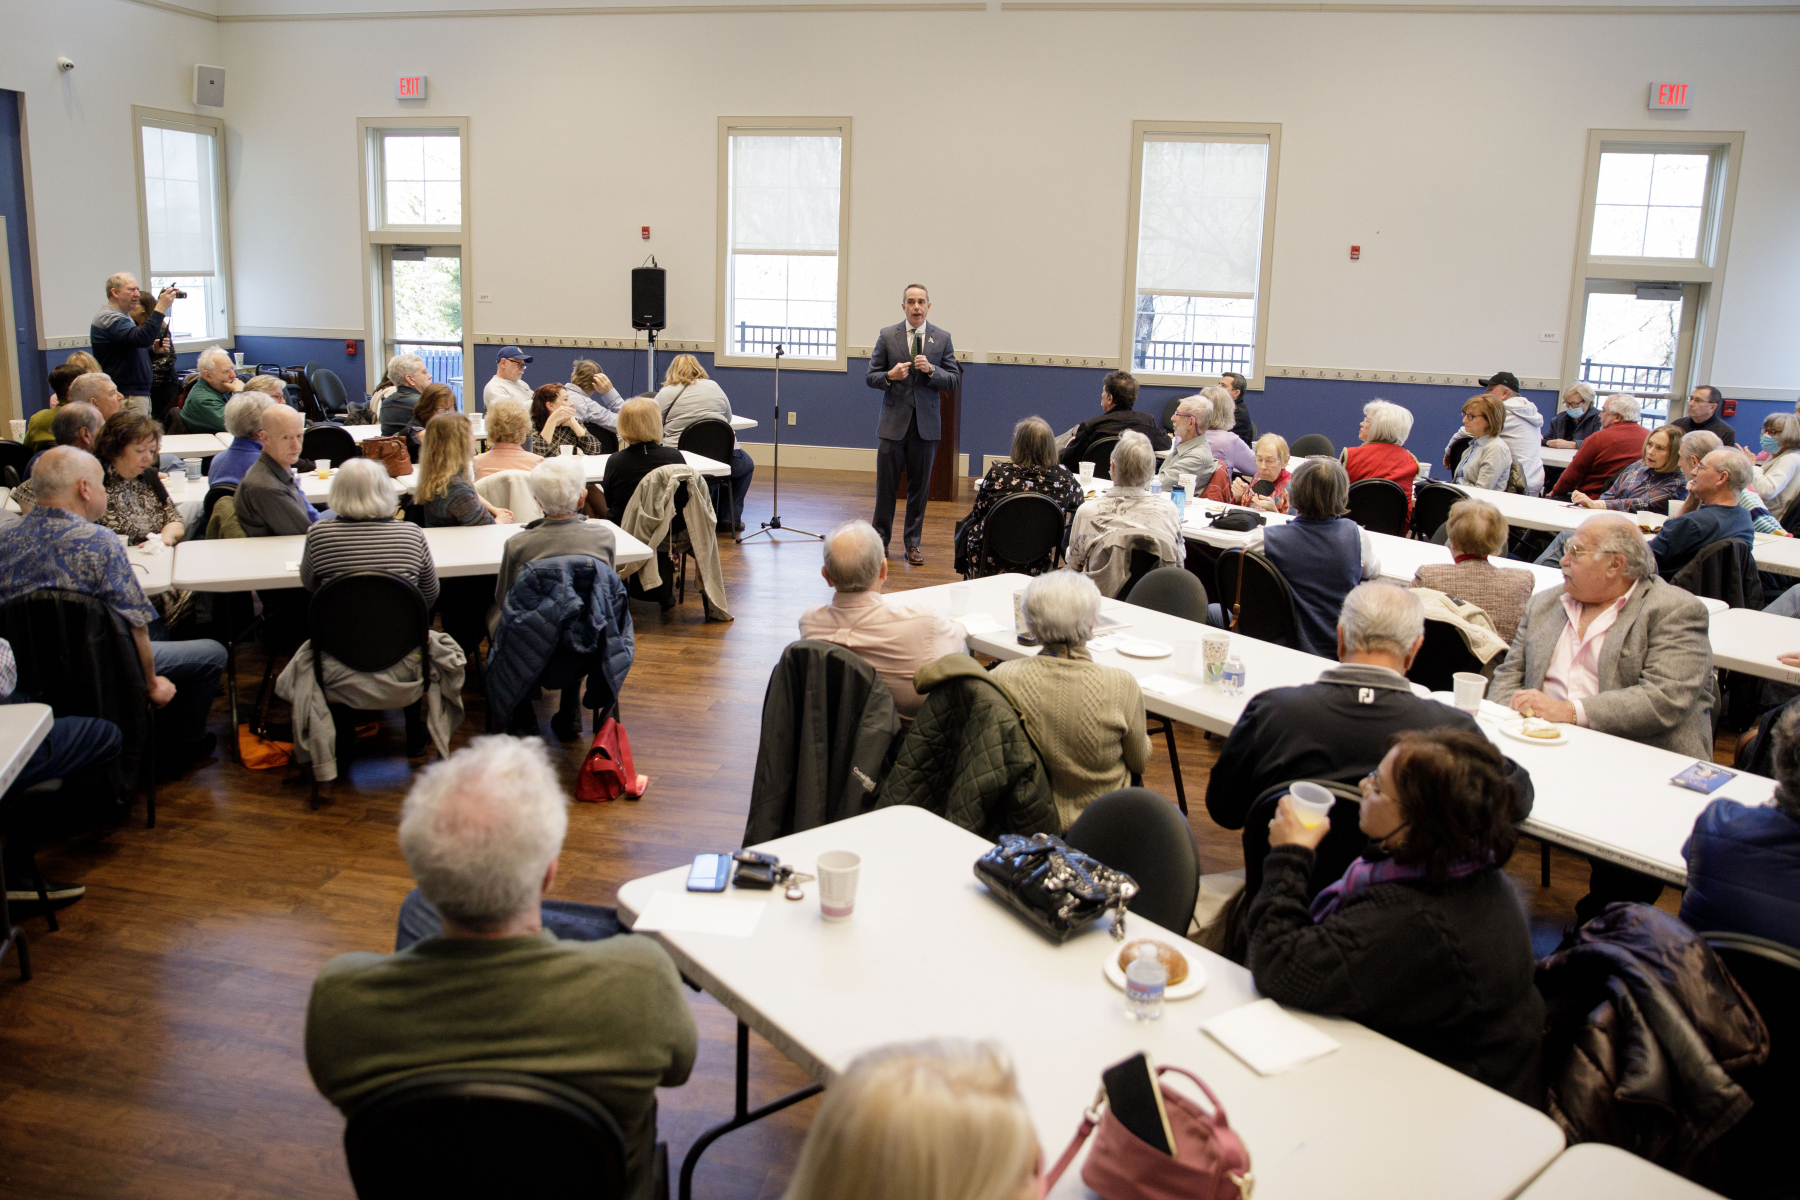 March 22, 2022: Legislative Coffee  at Lower Makefield Township Community Center.